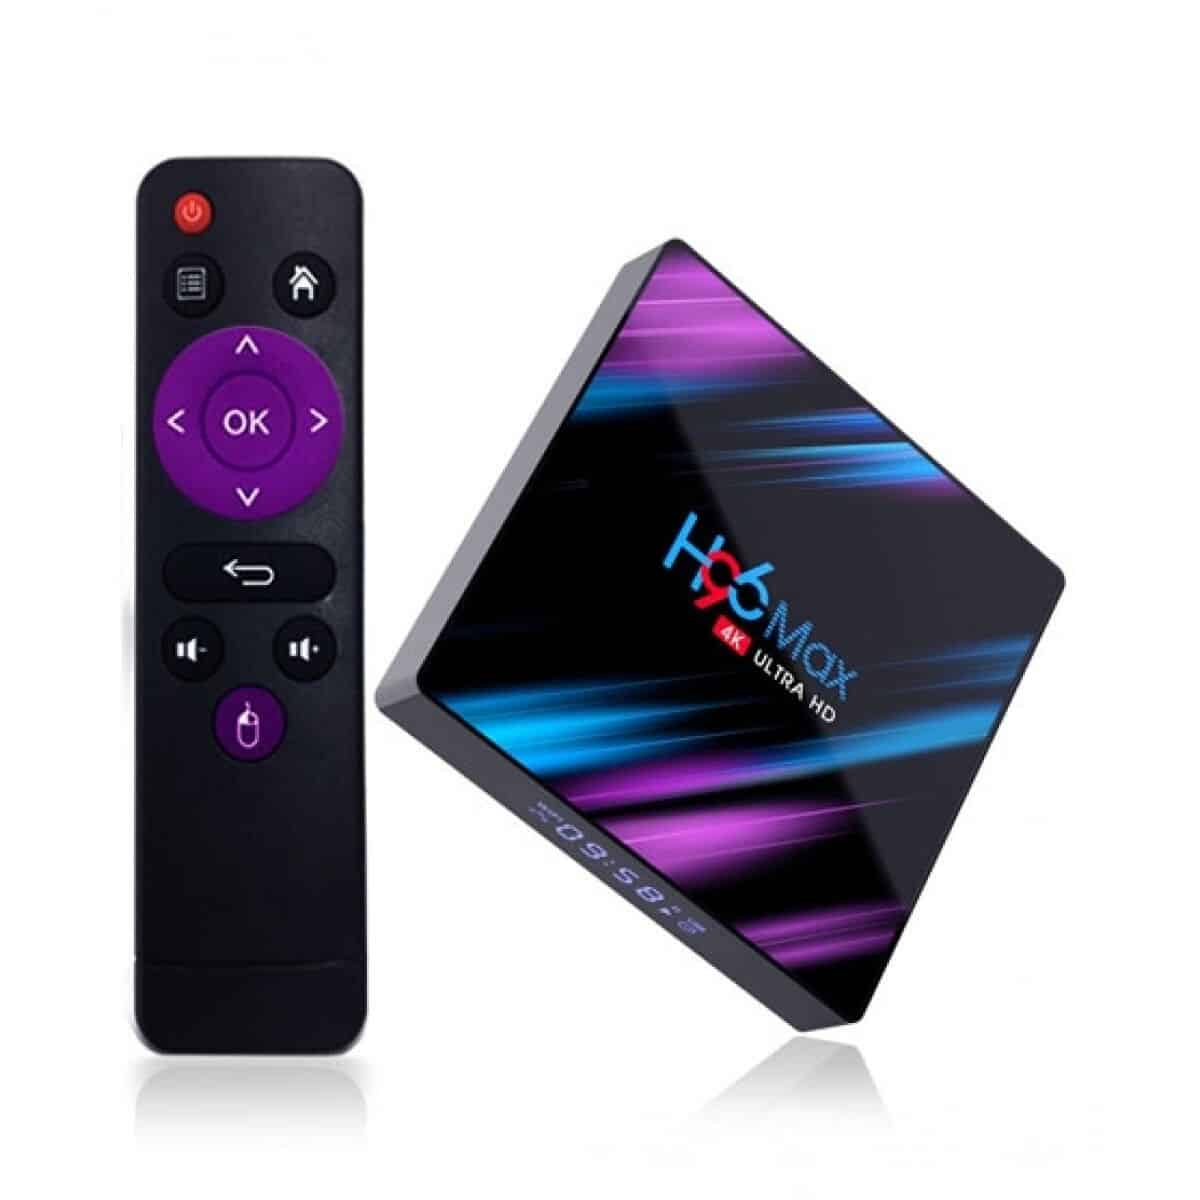 H96 Max 4K 2GB 16GB Android TV Box Price in Pakistan | Buy Xee Tech H96 Max  4K Android TV Box | iShopping.pk